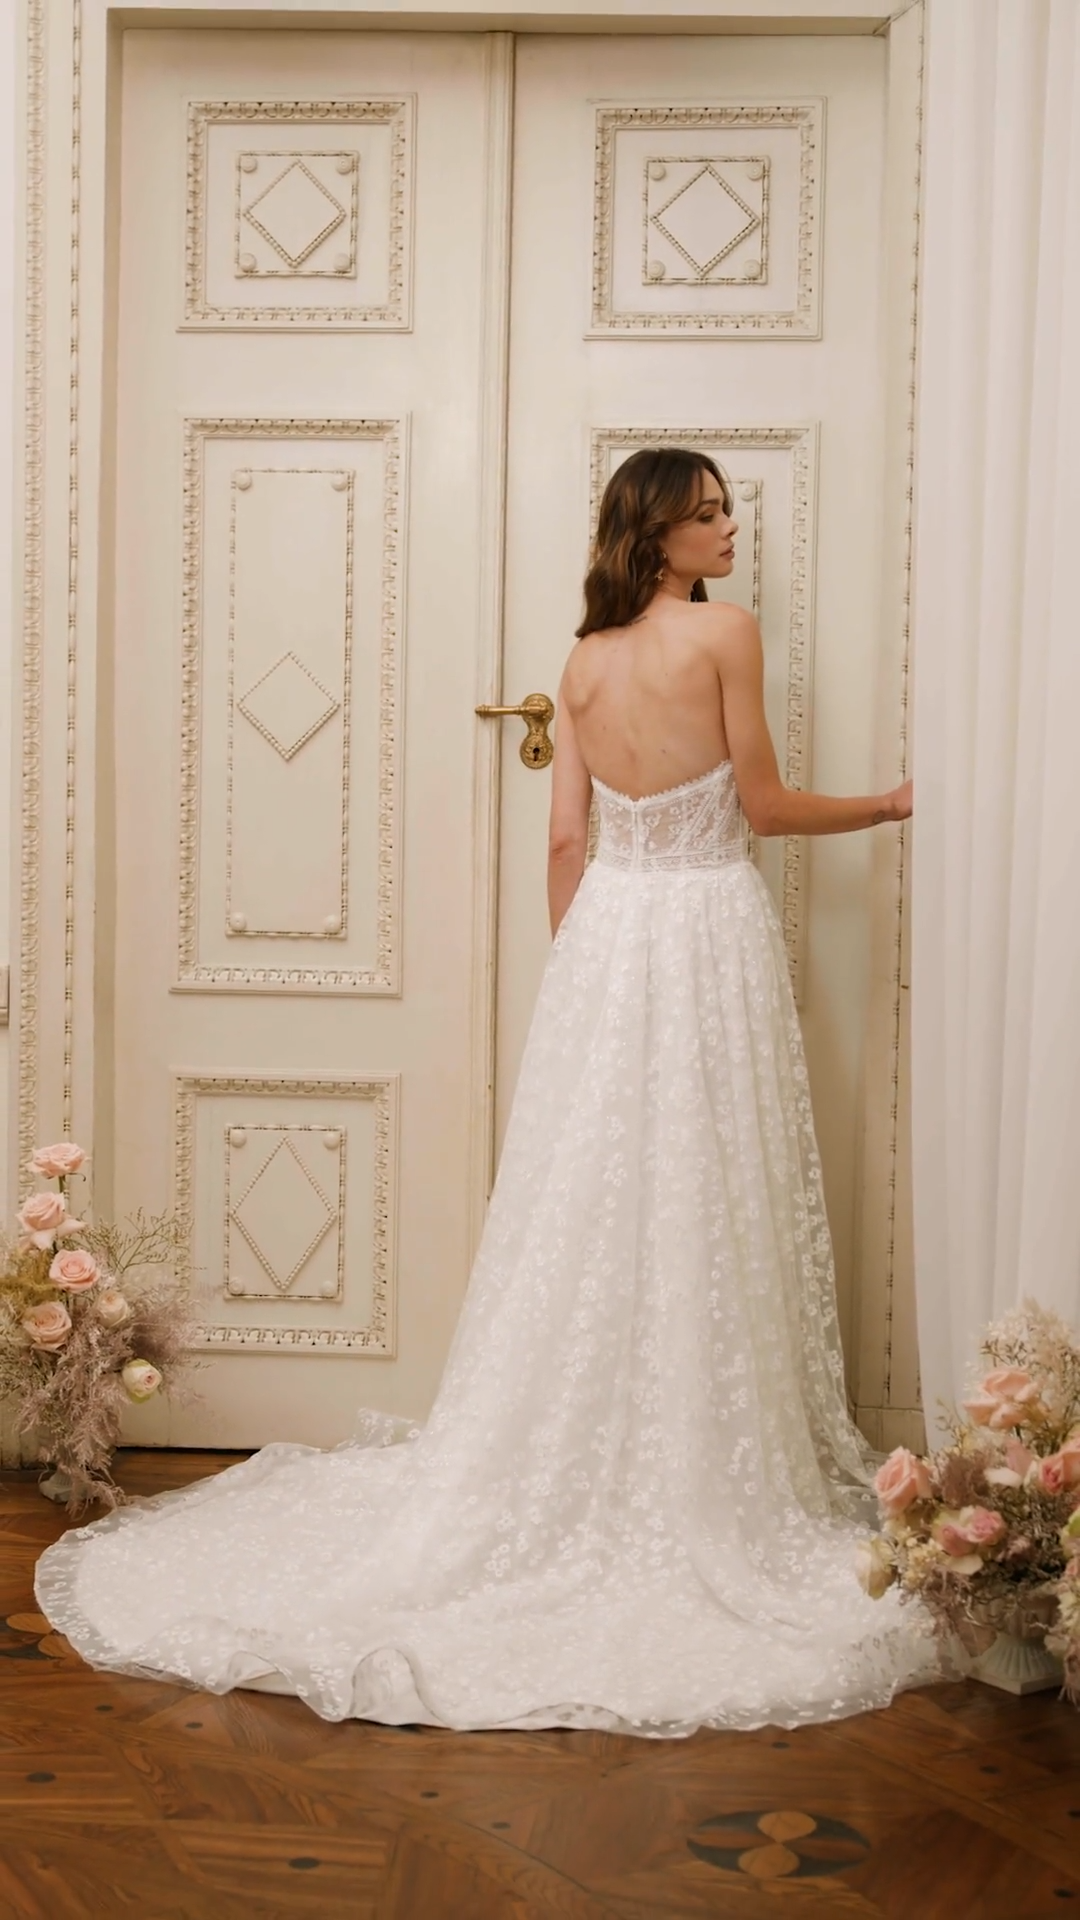 Moonlight Collection J6856 blush bridal gowns, ivory bridal gowns, white wedding dresses & more